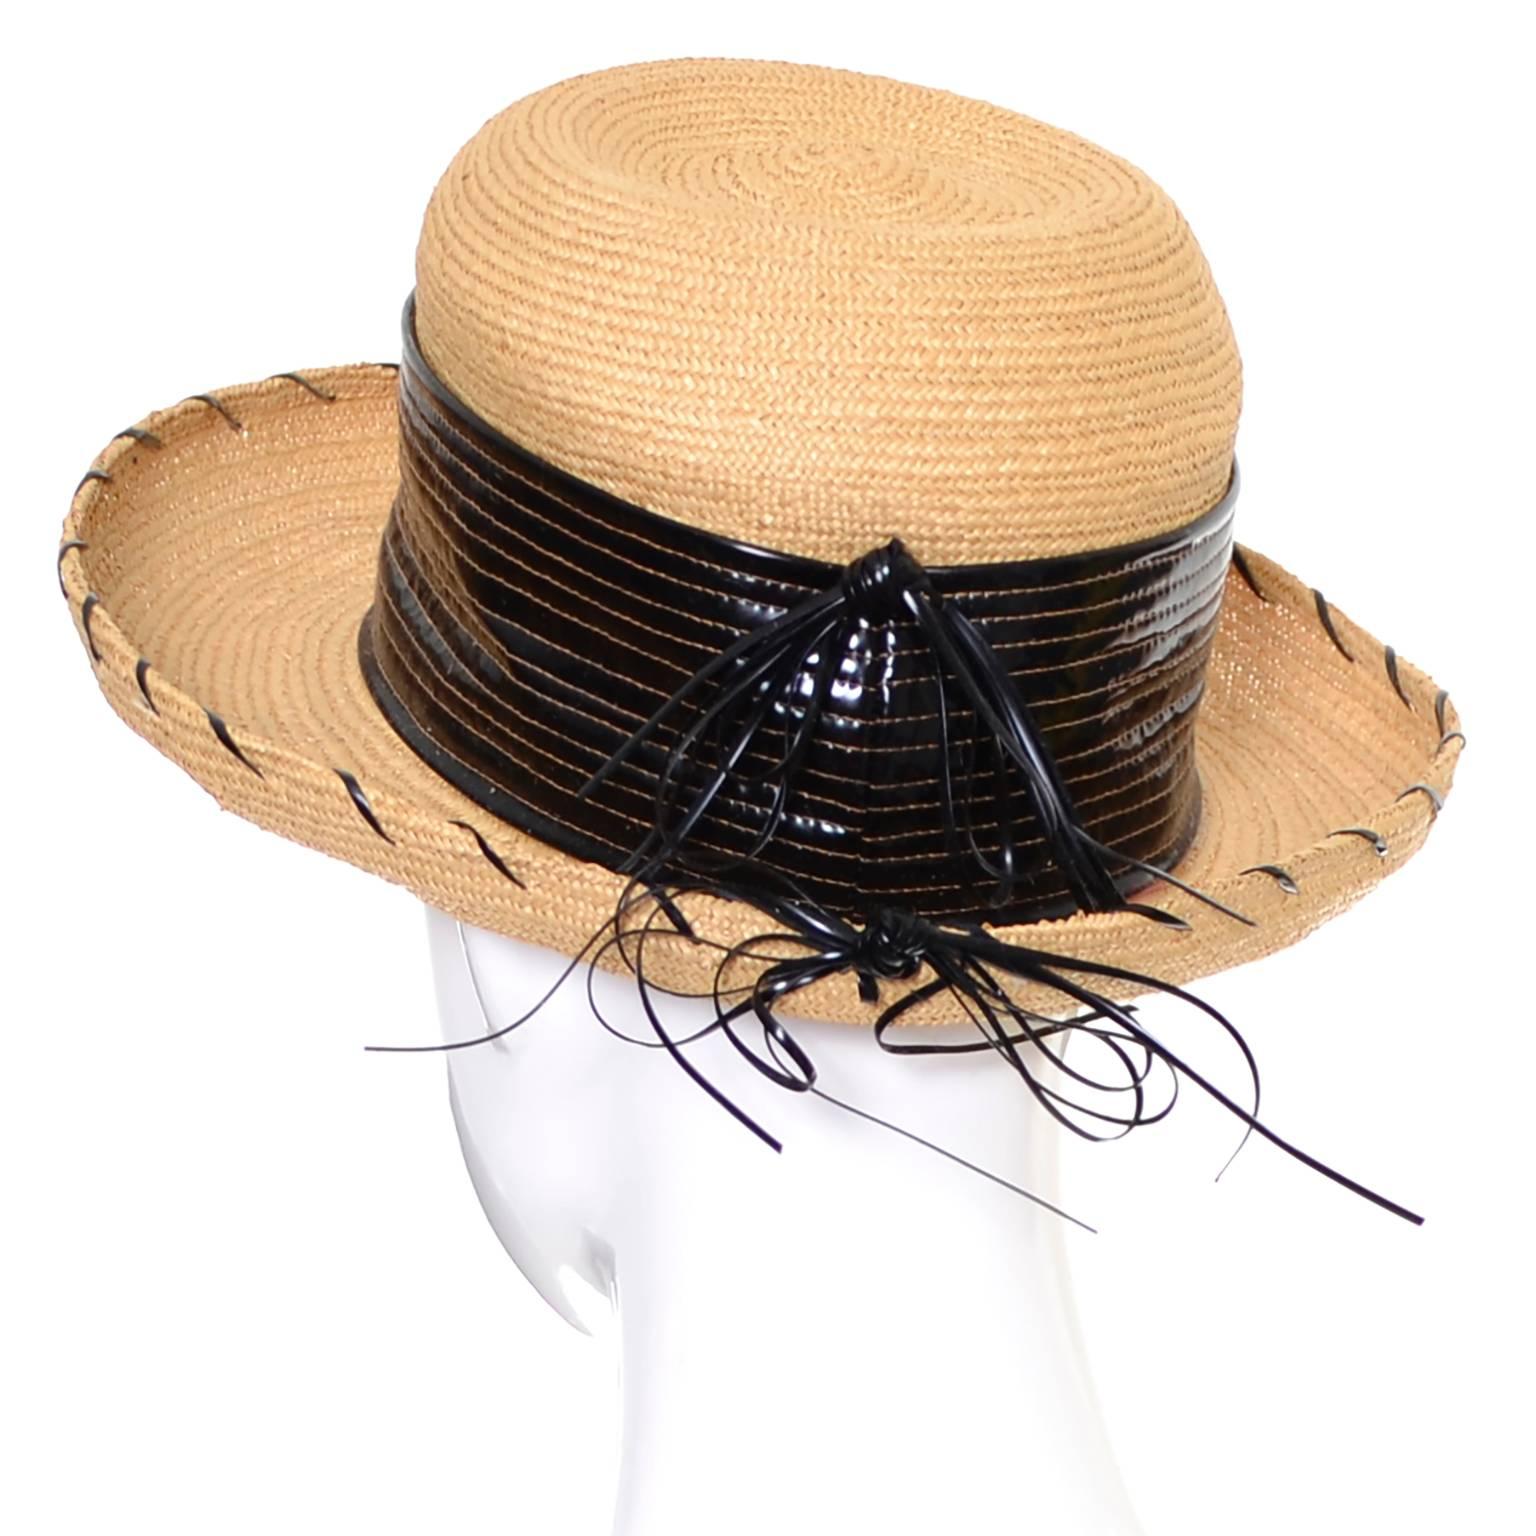 This adorable vintage straw hat from Schiaparelli was made in the 1960's and is in excellent condition.  The hat has a 20